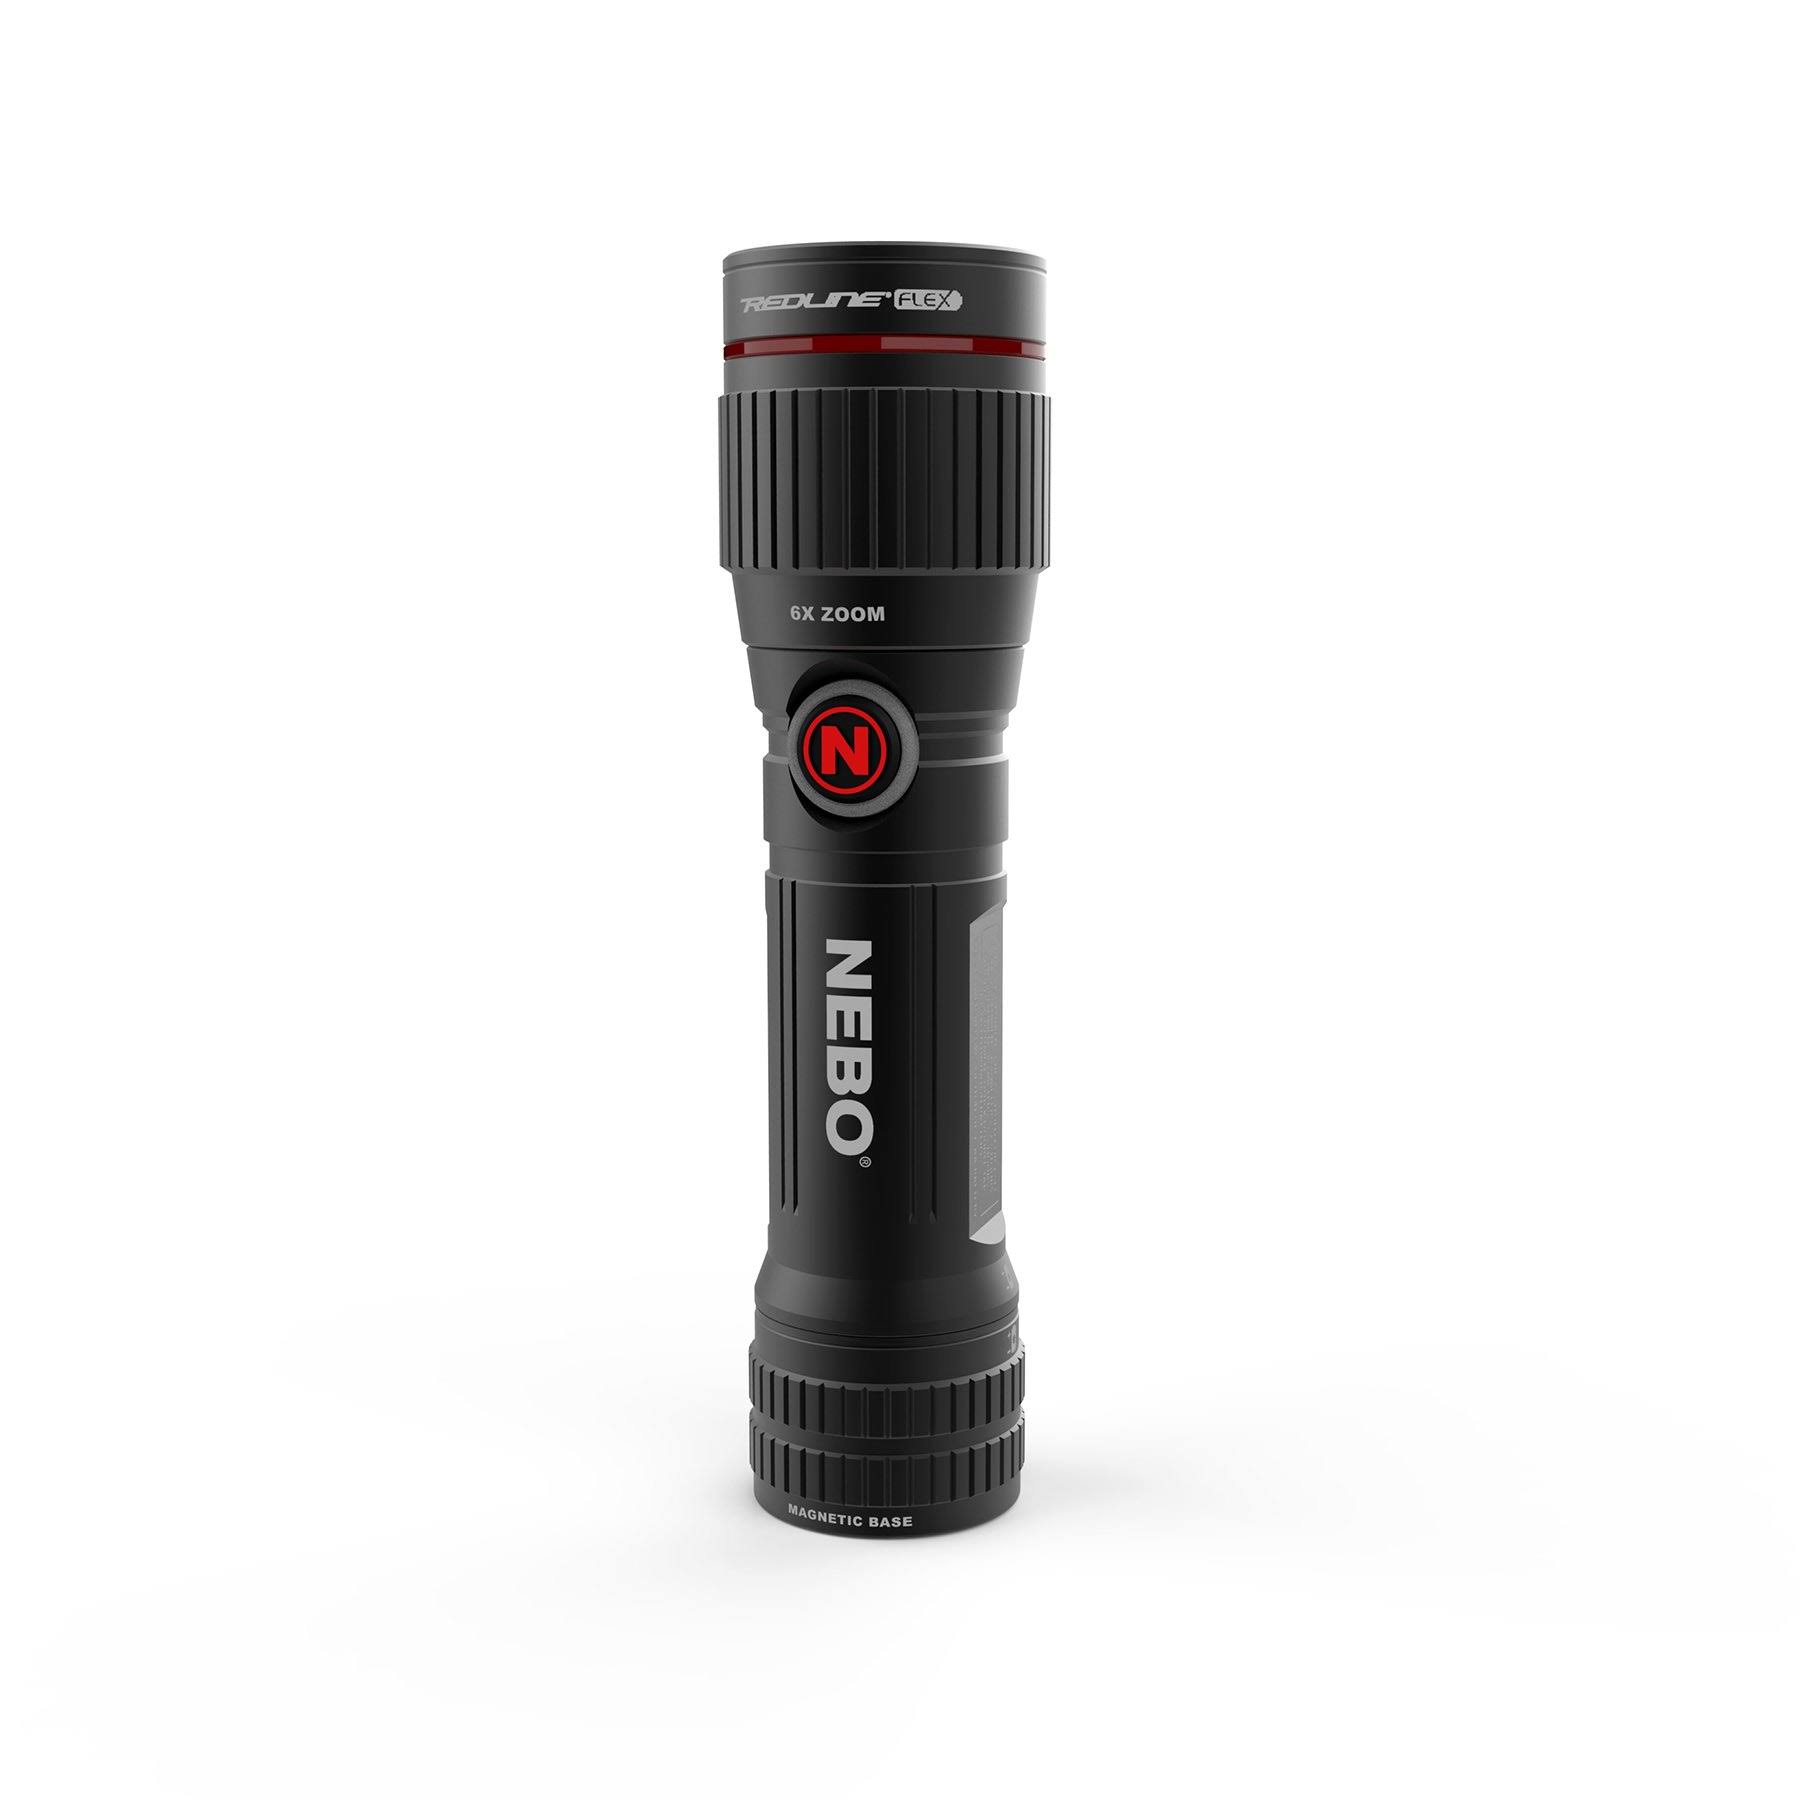 NEBO Redline Flex 450-Lumen Flashlight - 450 Lumen Turbo Mode with Flex Power Option Included Rechargeable Battery or AA Battery, Includes Clip and